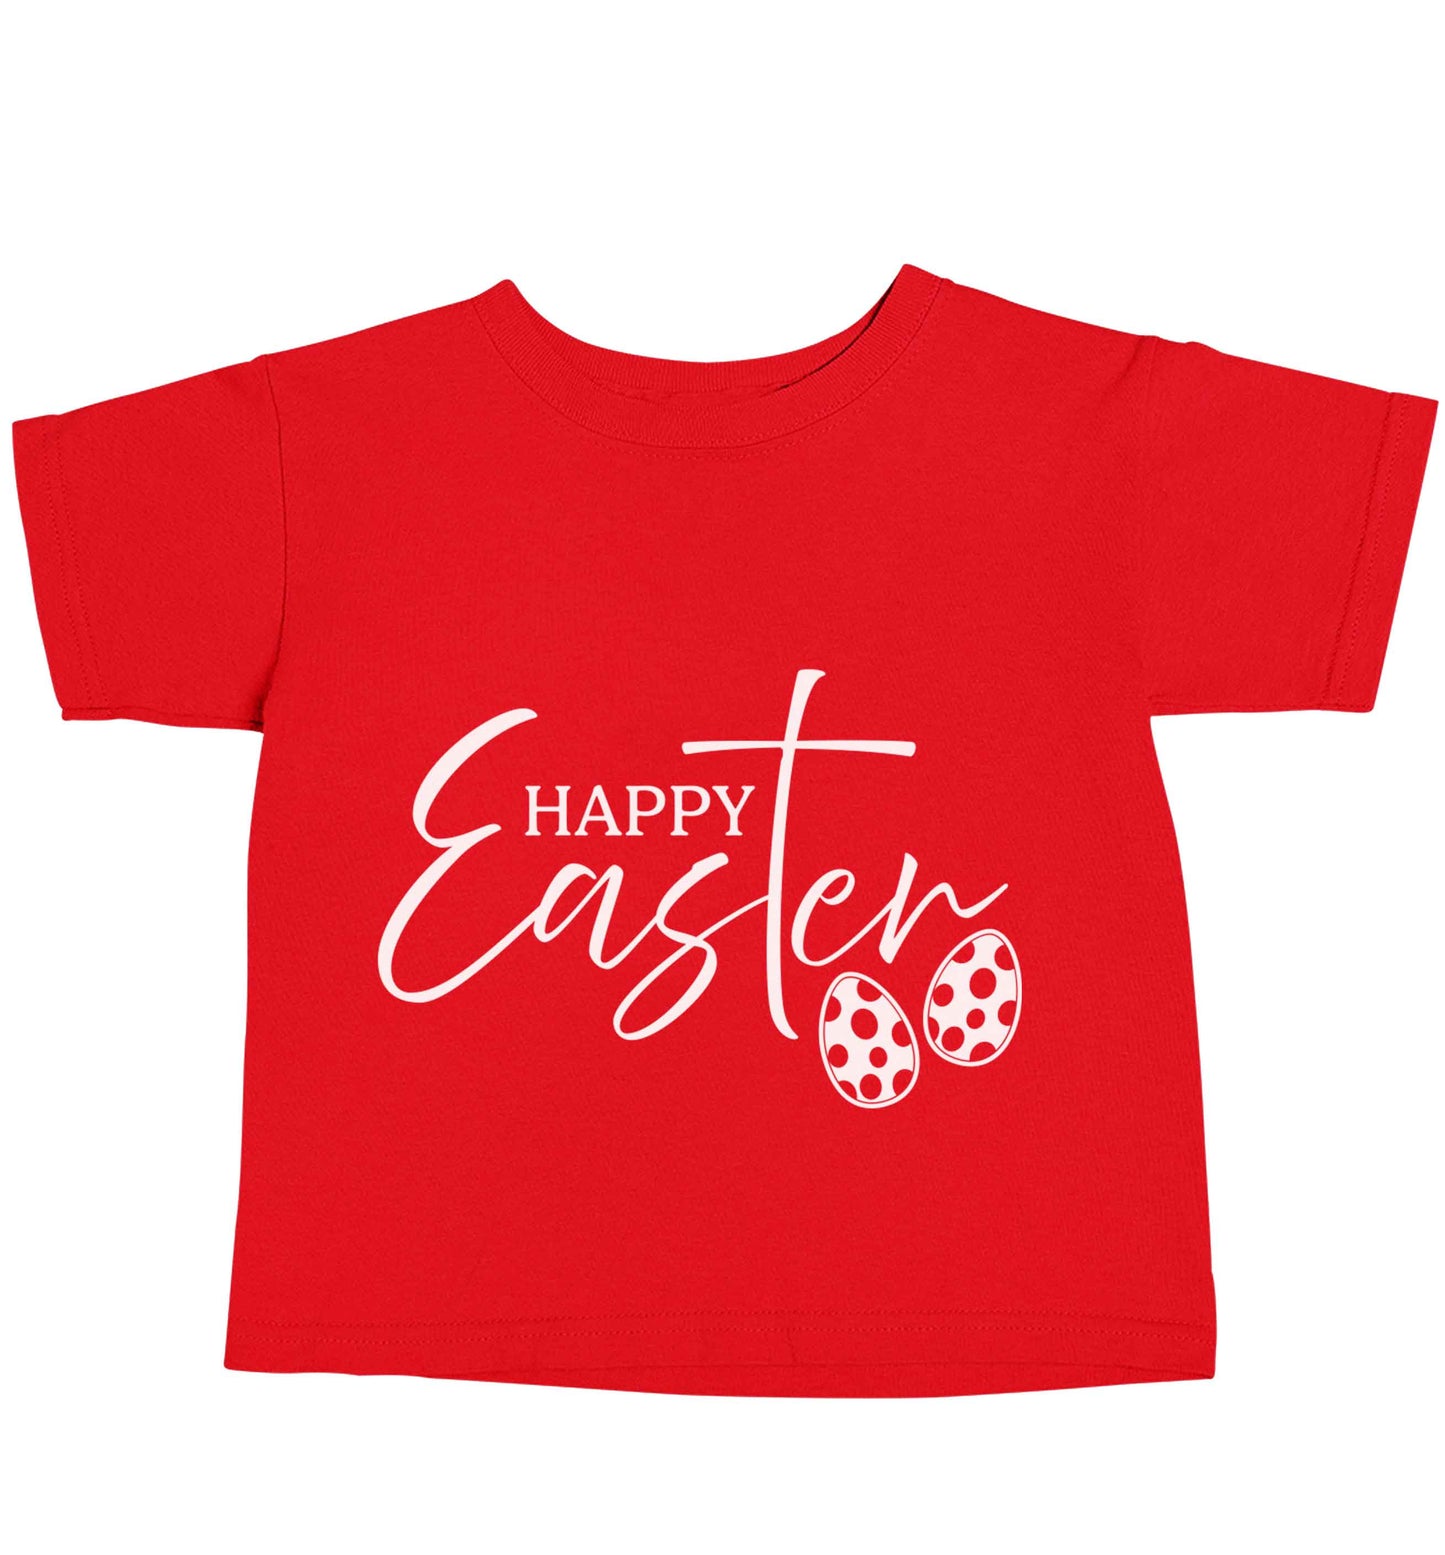 Happy Easter red baby toddler Tshirt 2 Years